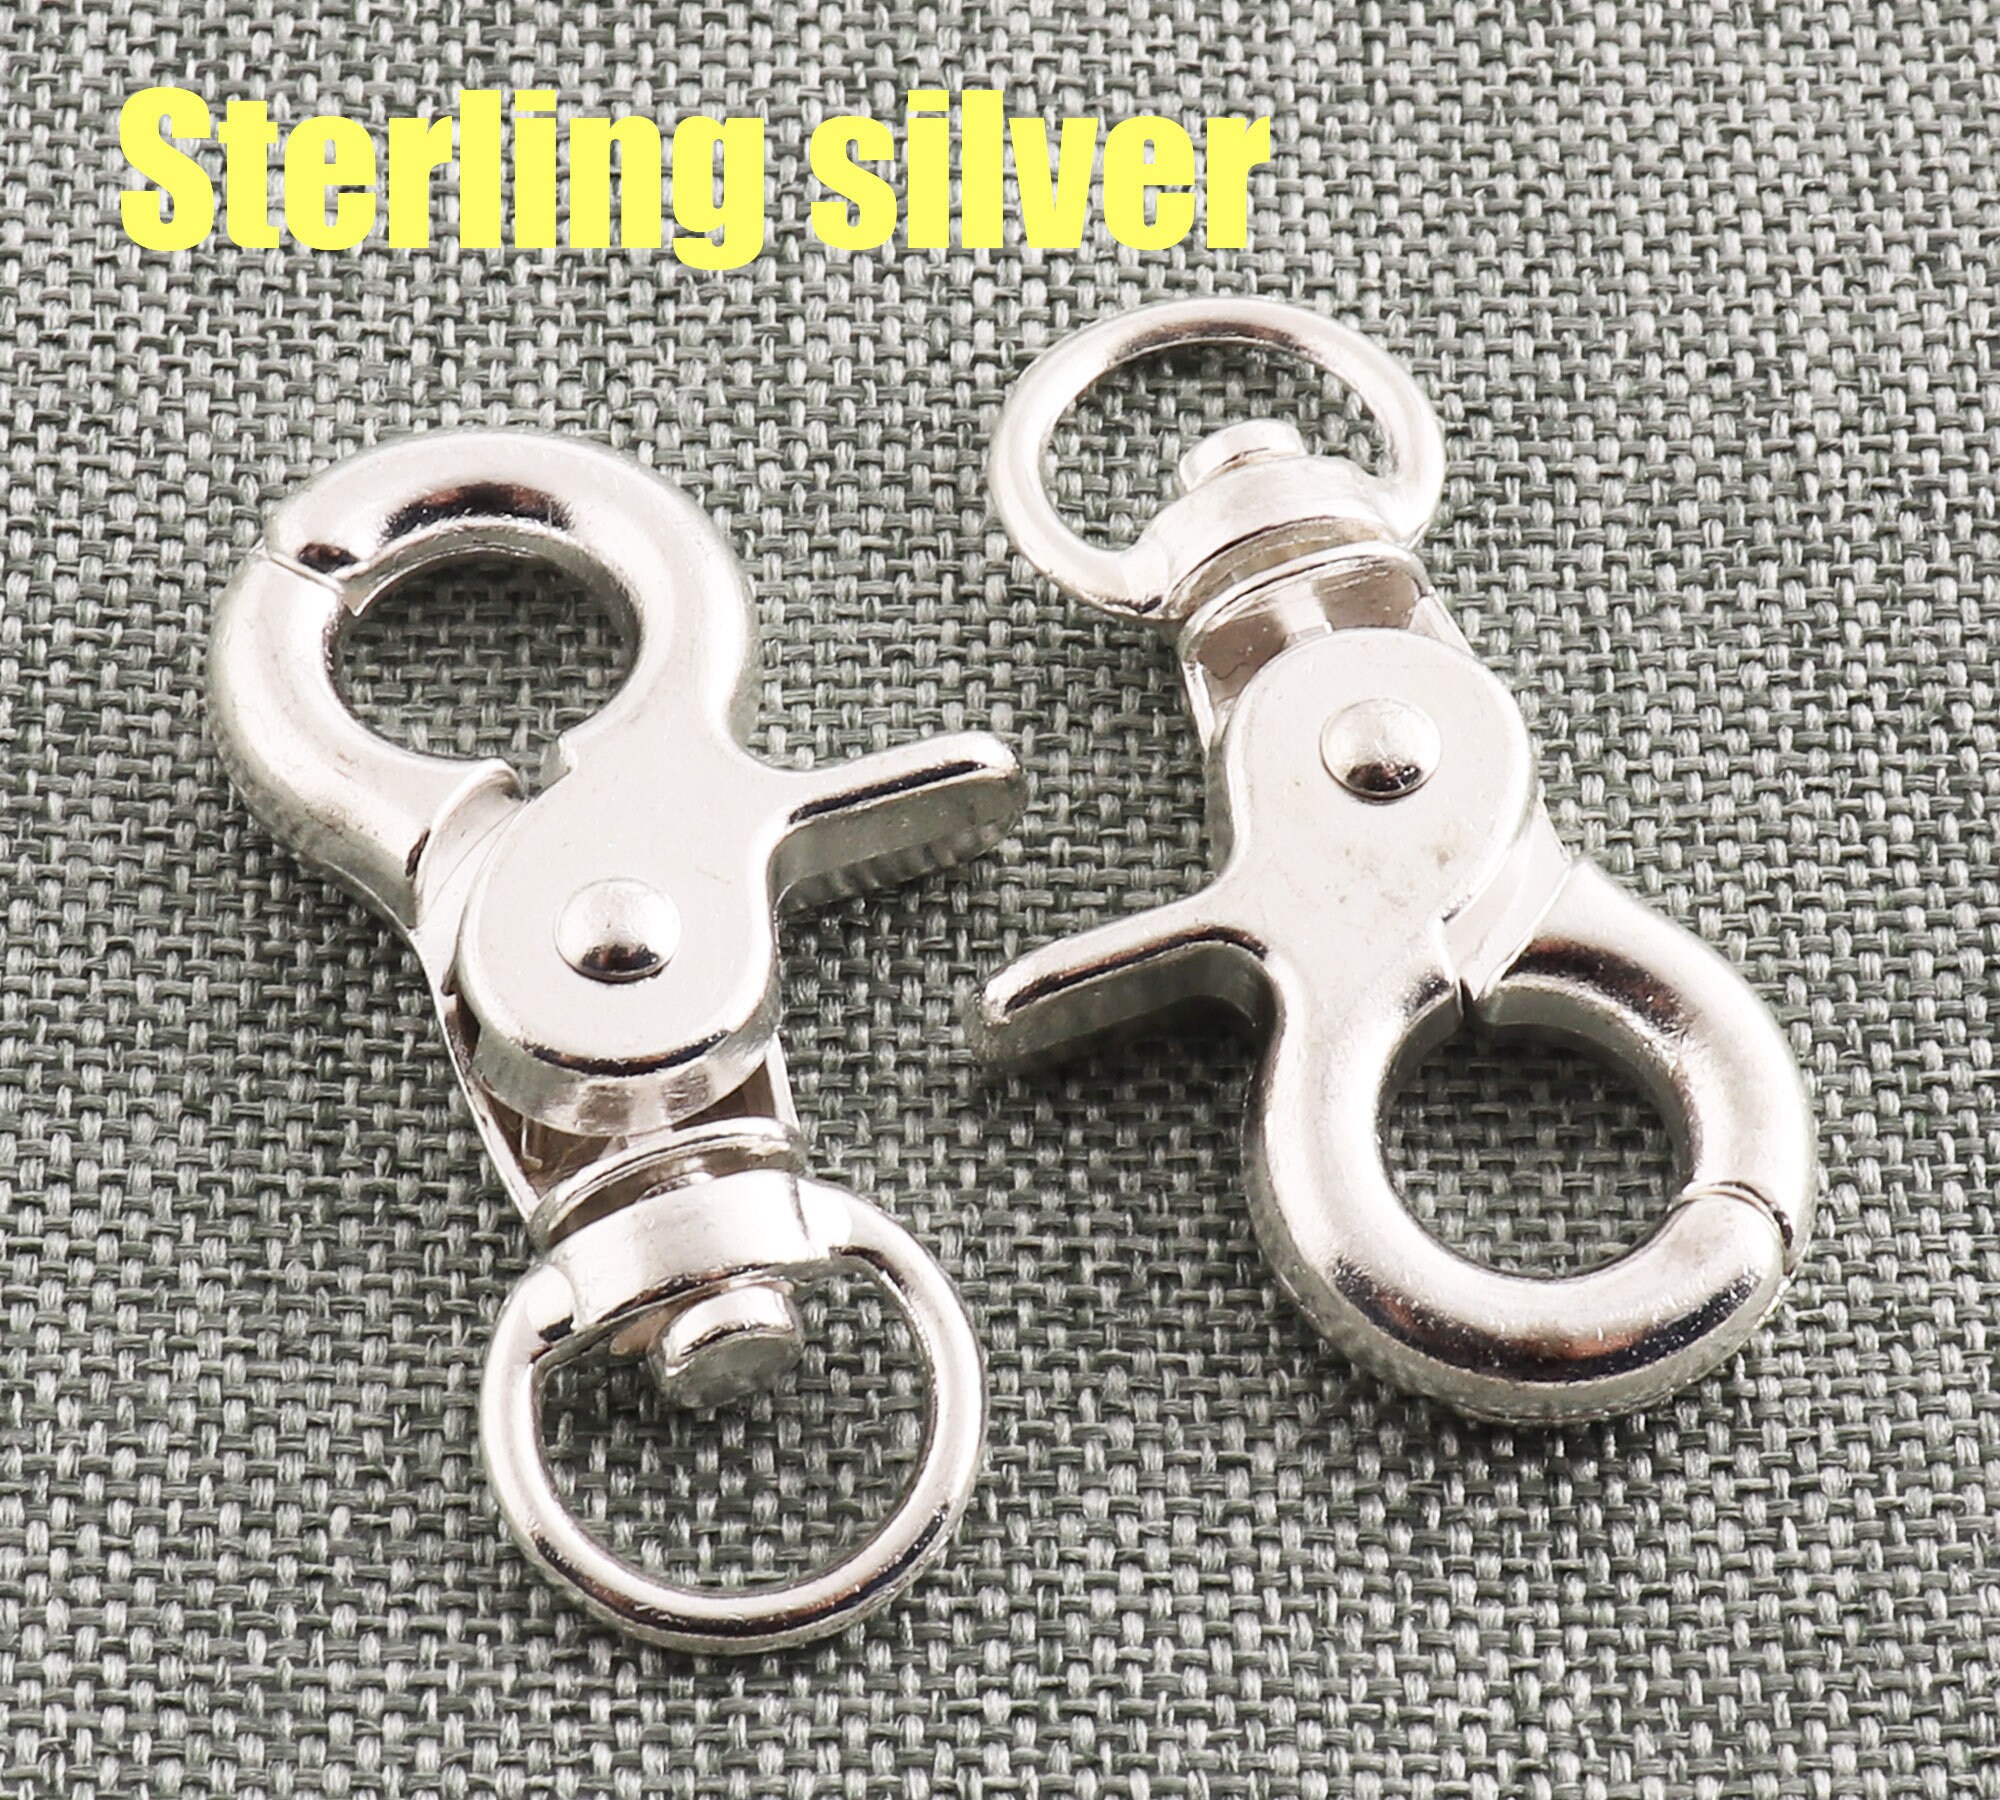 12mm silver clasp swivel clasp jewelry making supply lobster claw clasp -  Fleamarket Muse